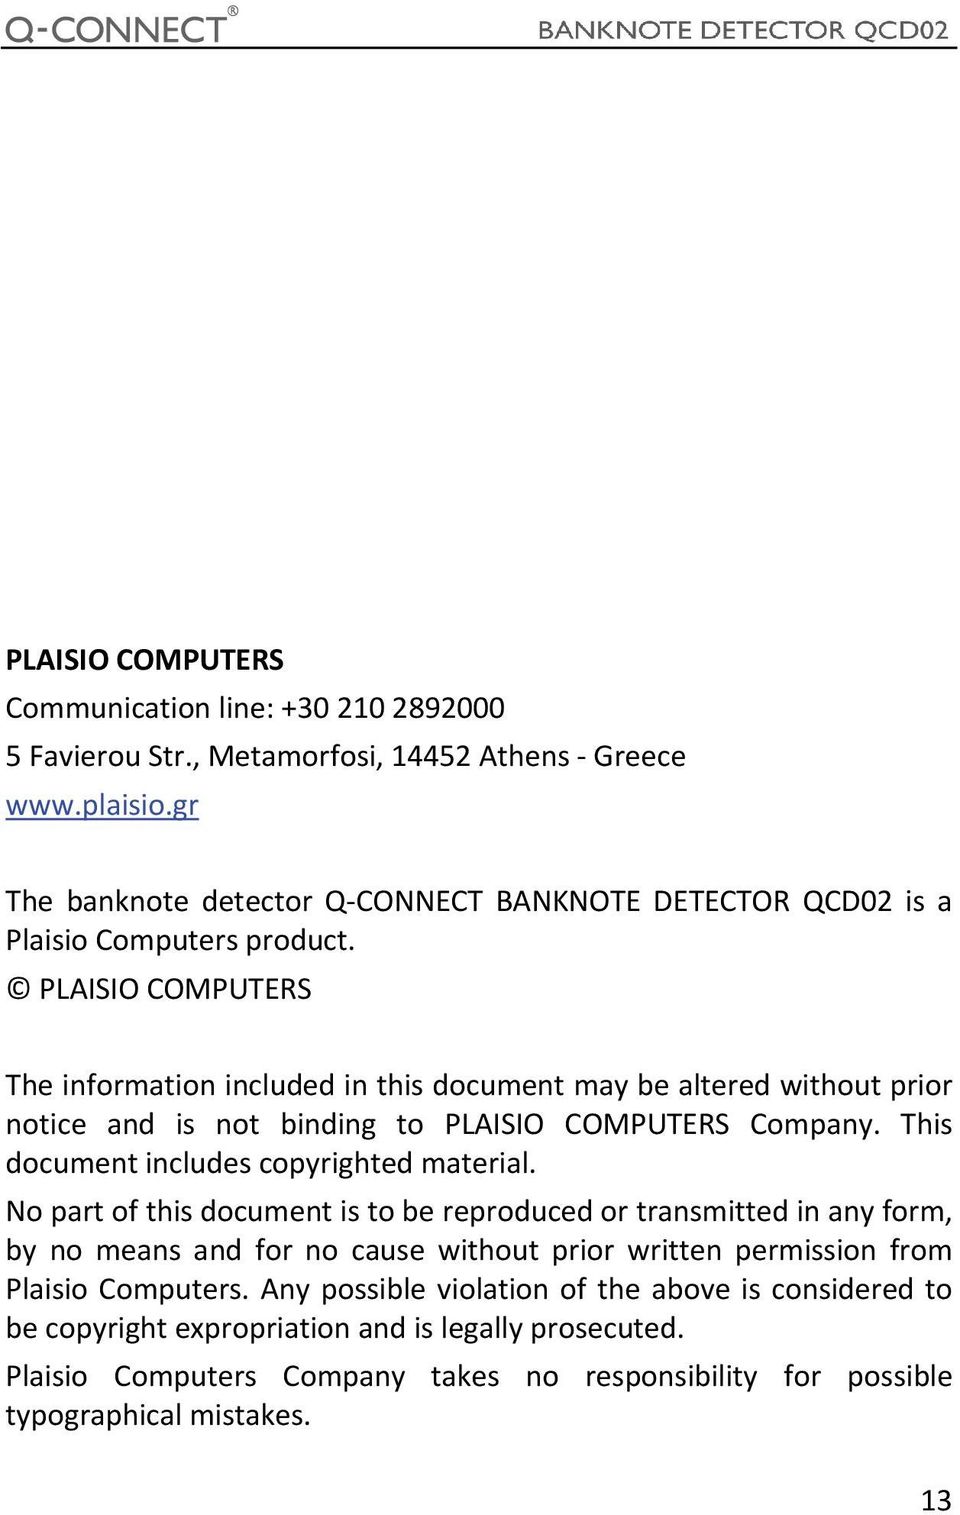 PLAISIO COMPUTERS The information included in this document may be altered without prior notice and is not binding to PLAISIO COMPUTERS Company.